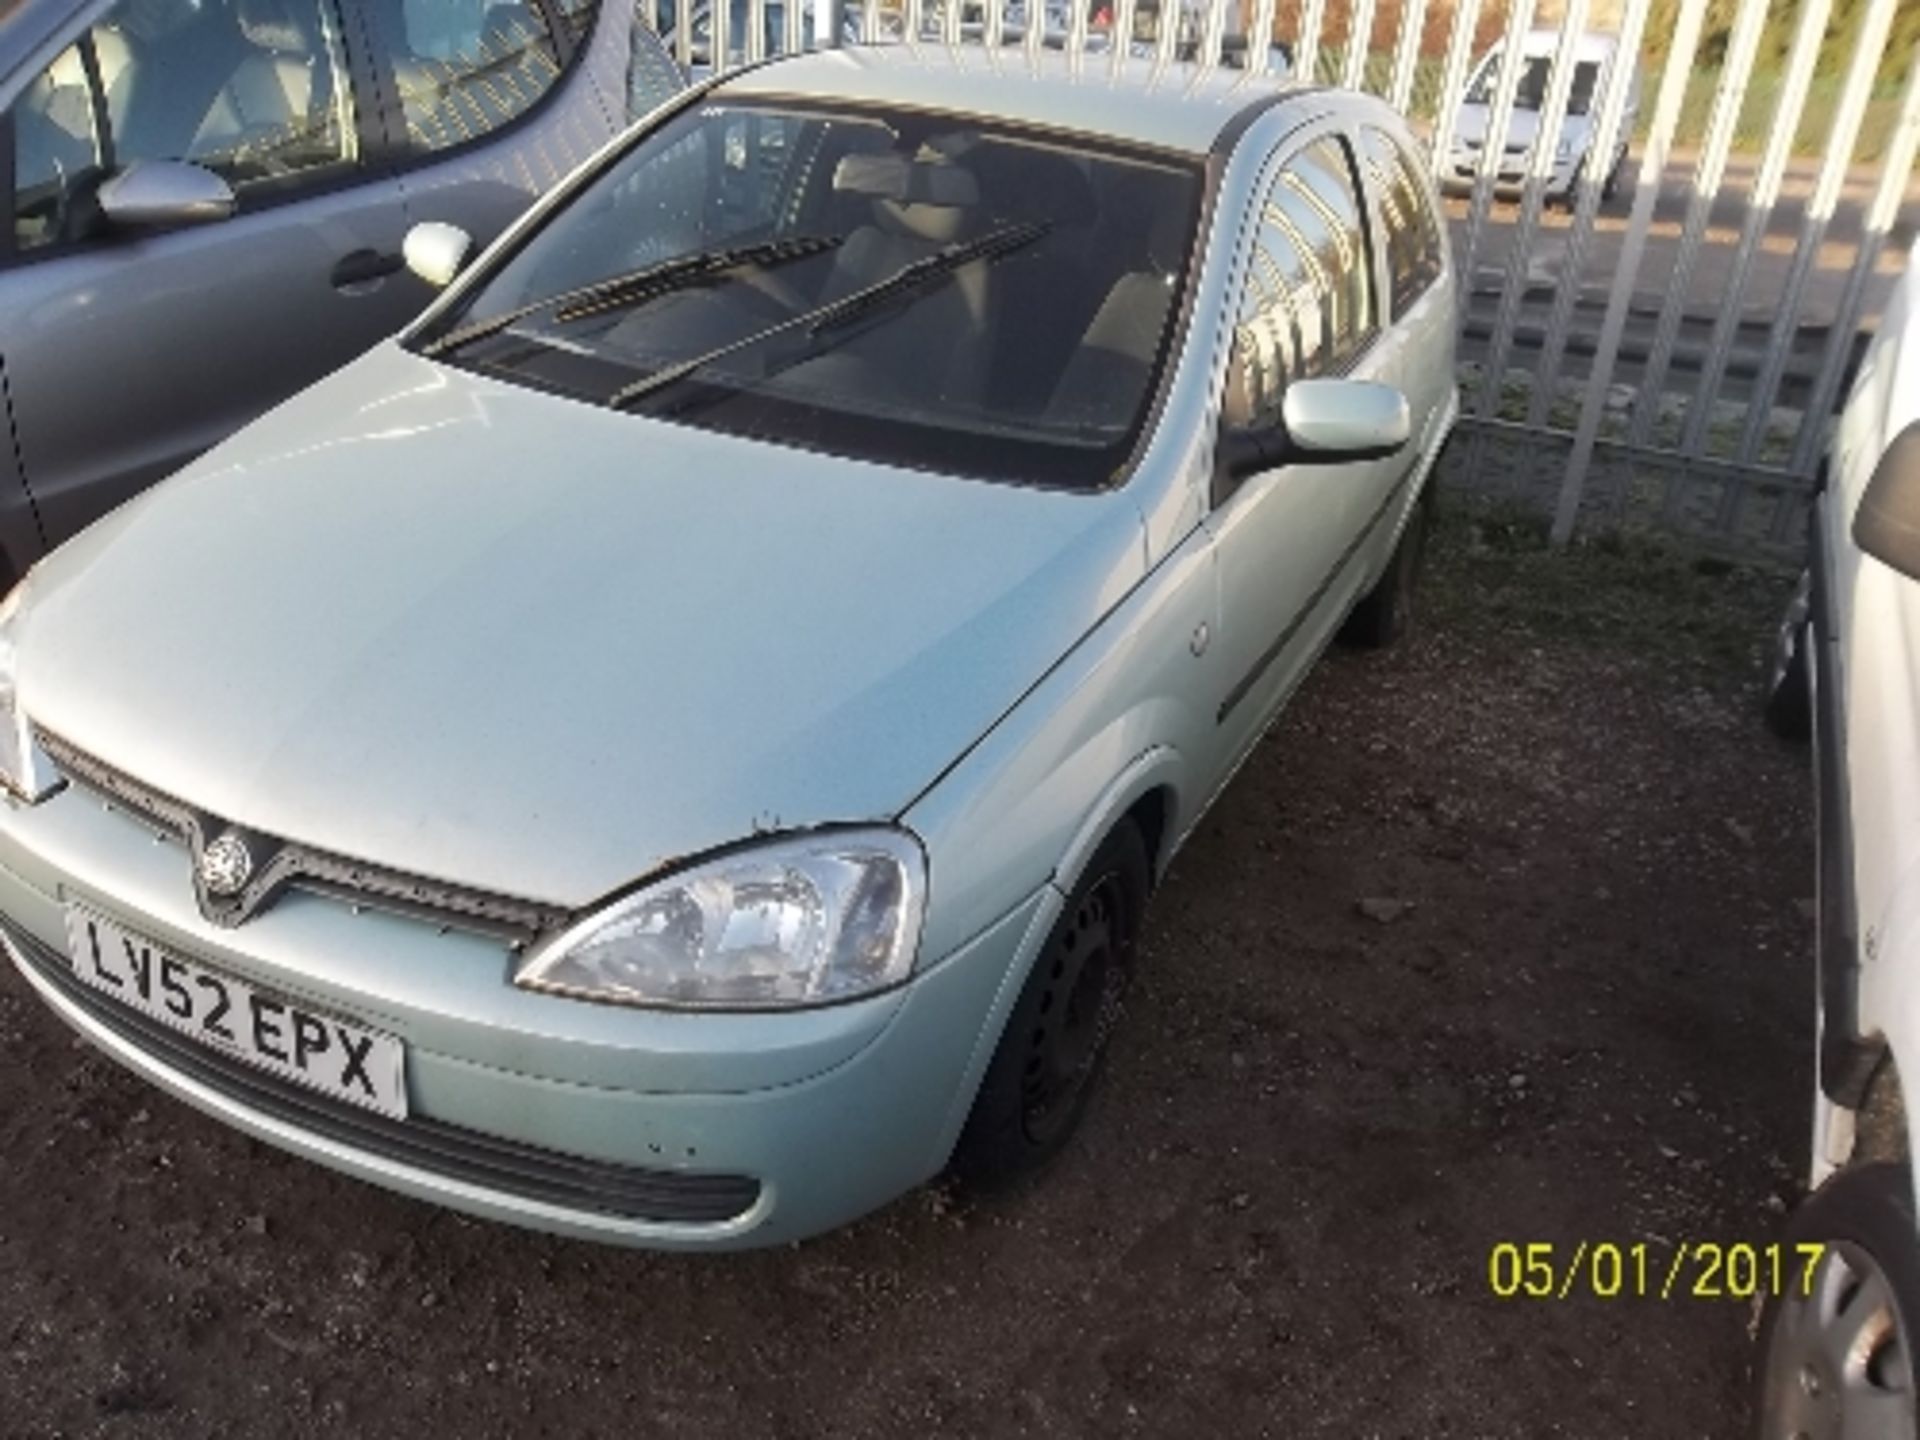 Vauxhall Corsa Comfort 16V - LV52 EPX Date of registration: 11.10.2002 1199cc, petrol, manual, green - Image 5 of 5